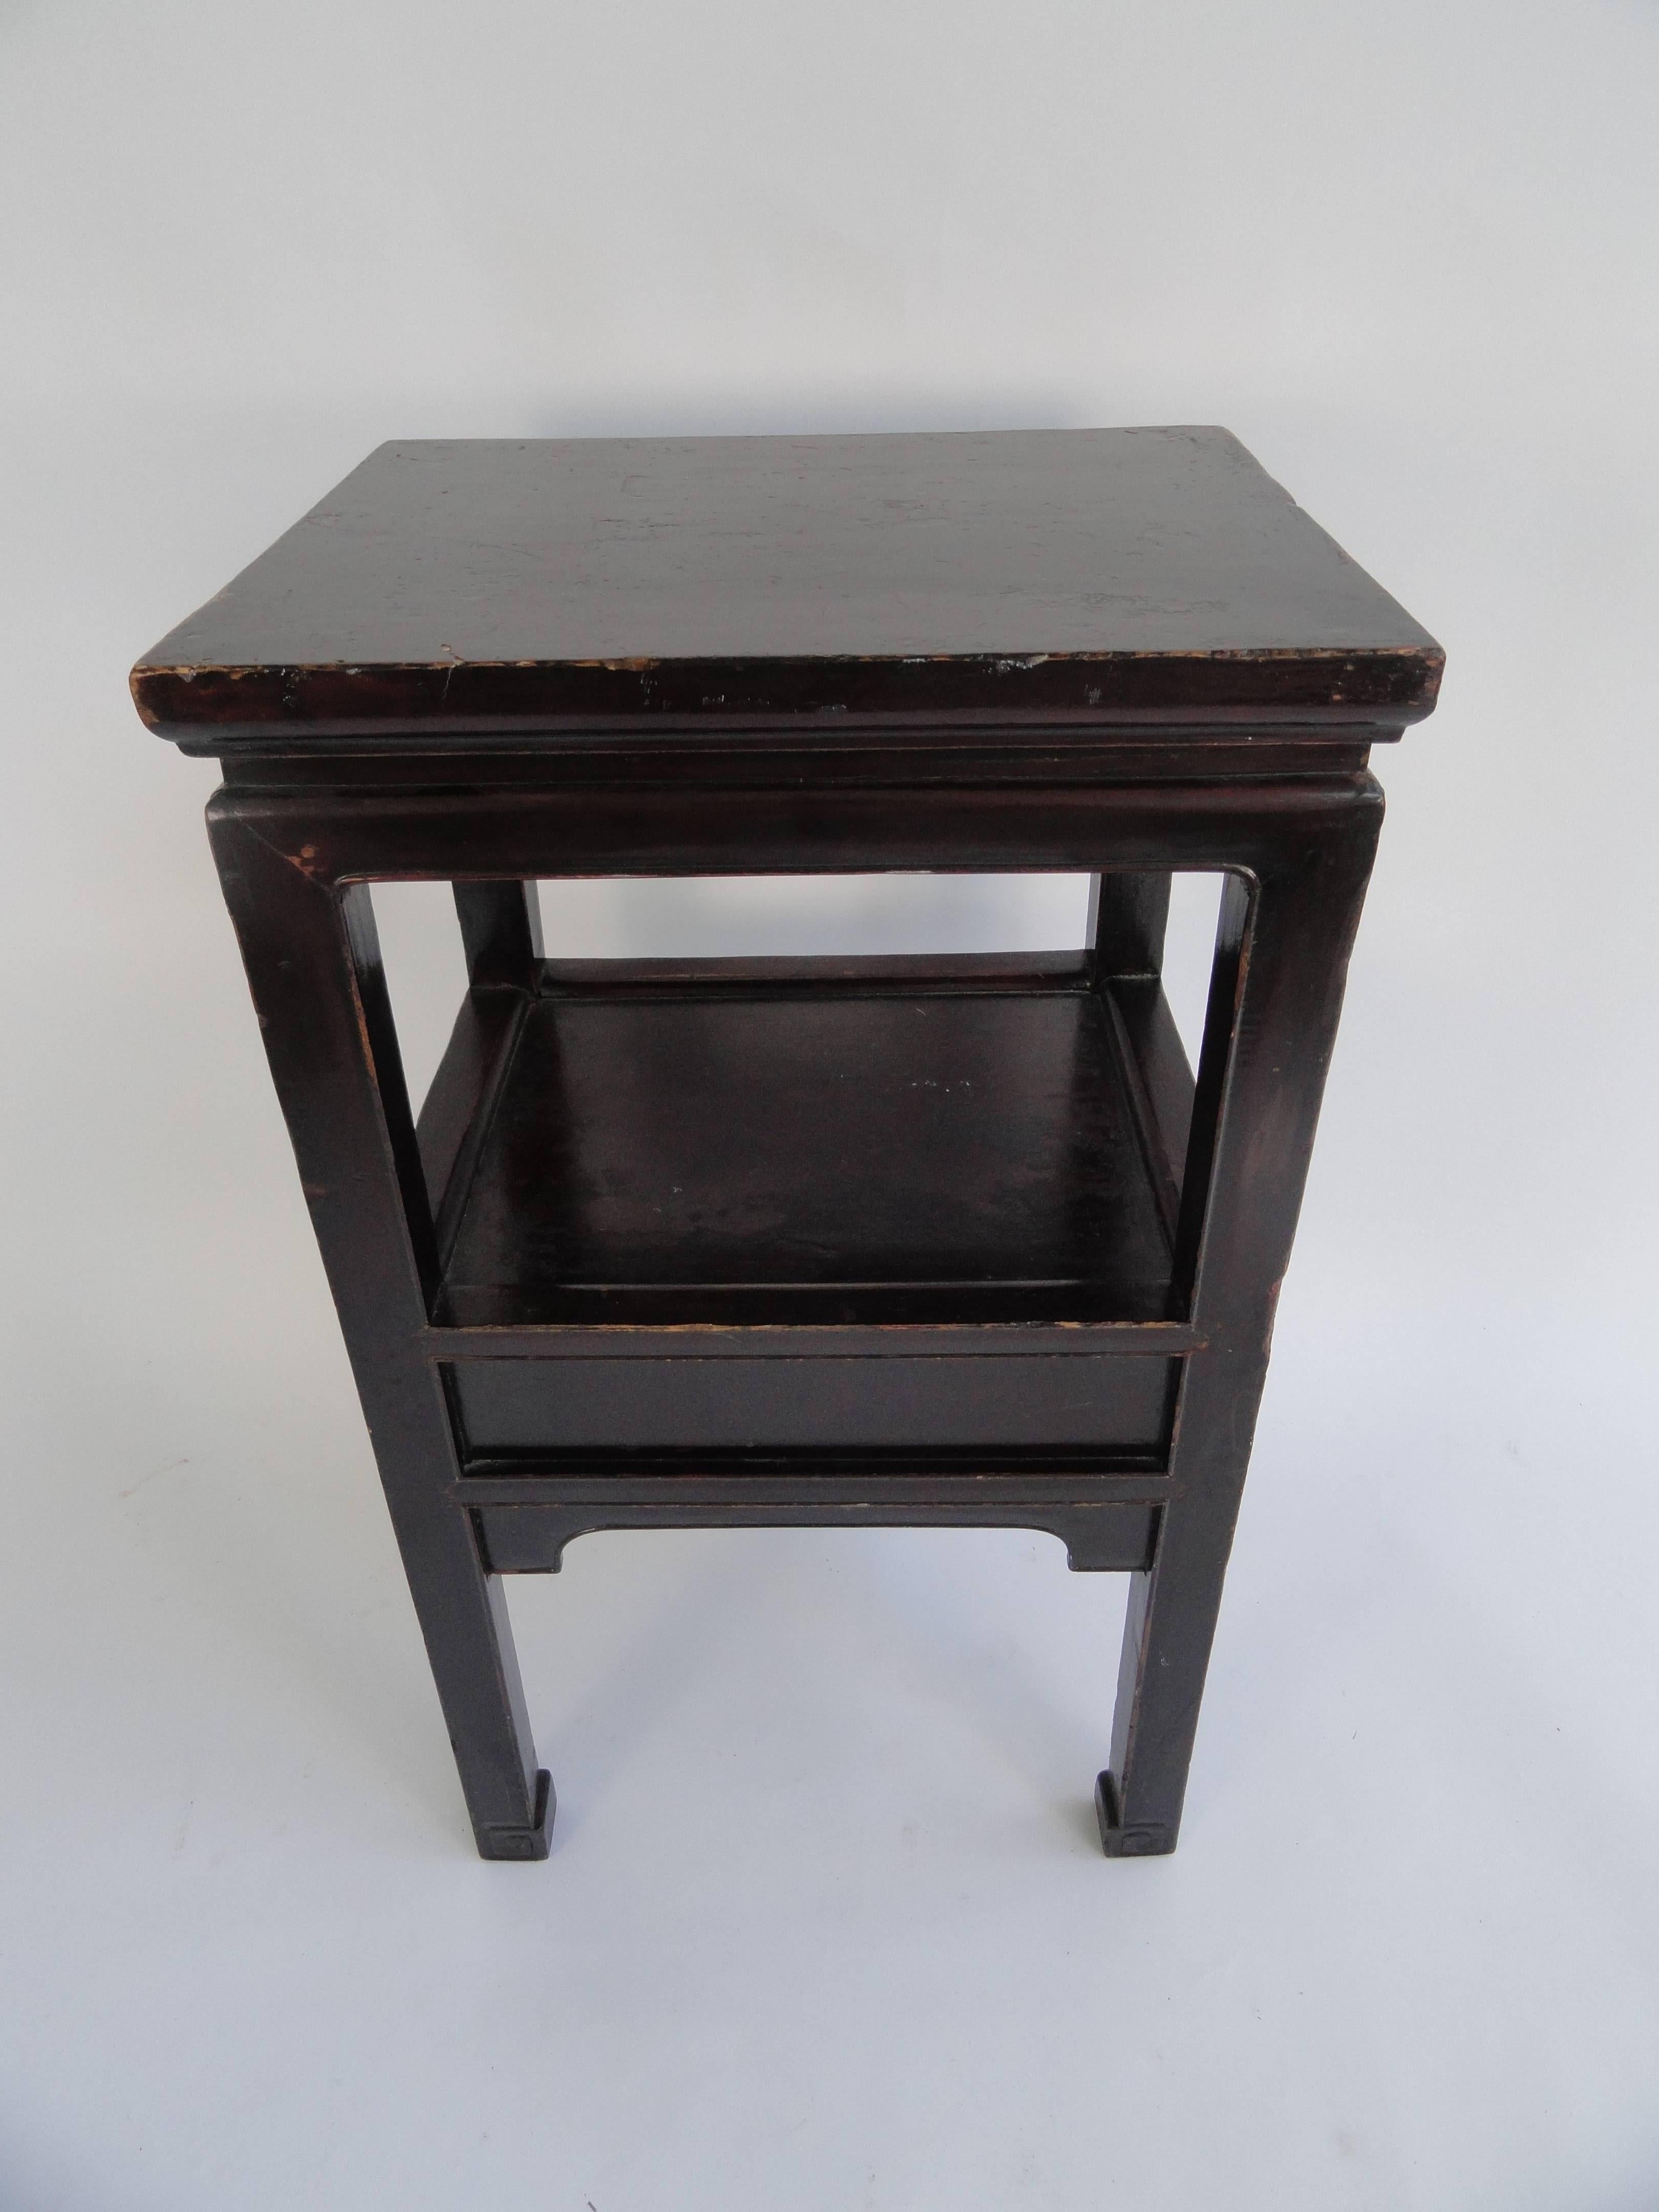 19th century Chinese altar table with original espresso finish. 
Stamp on side of table.